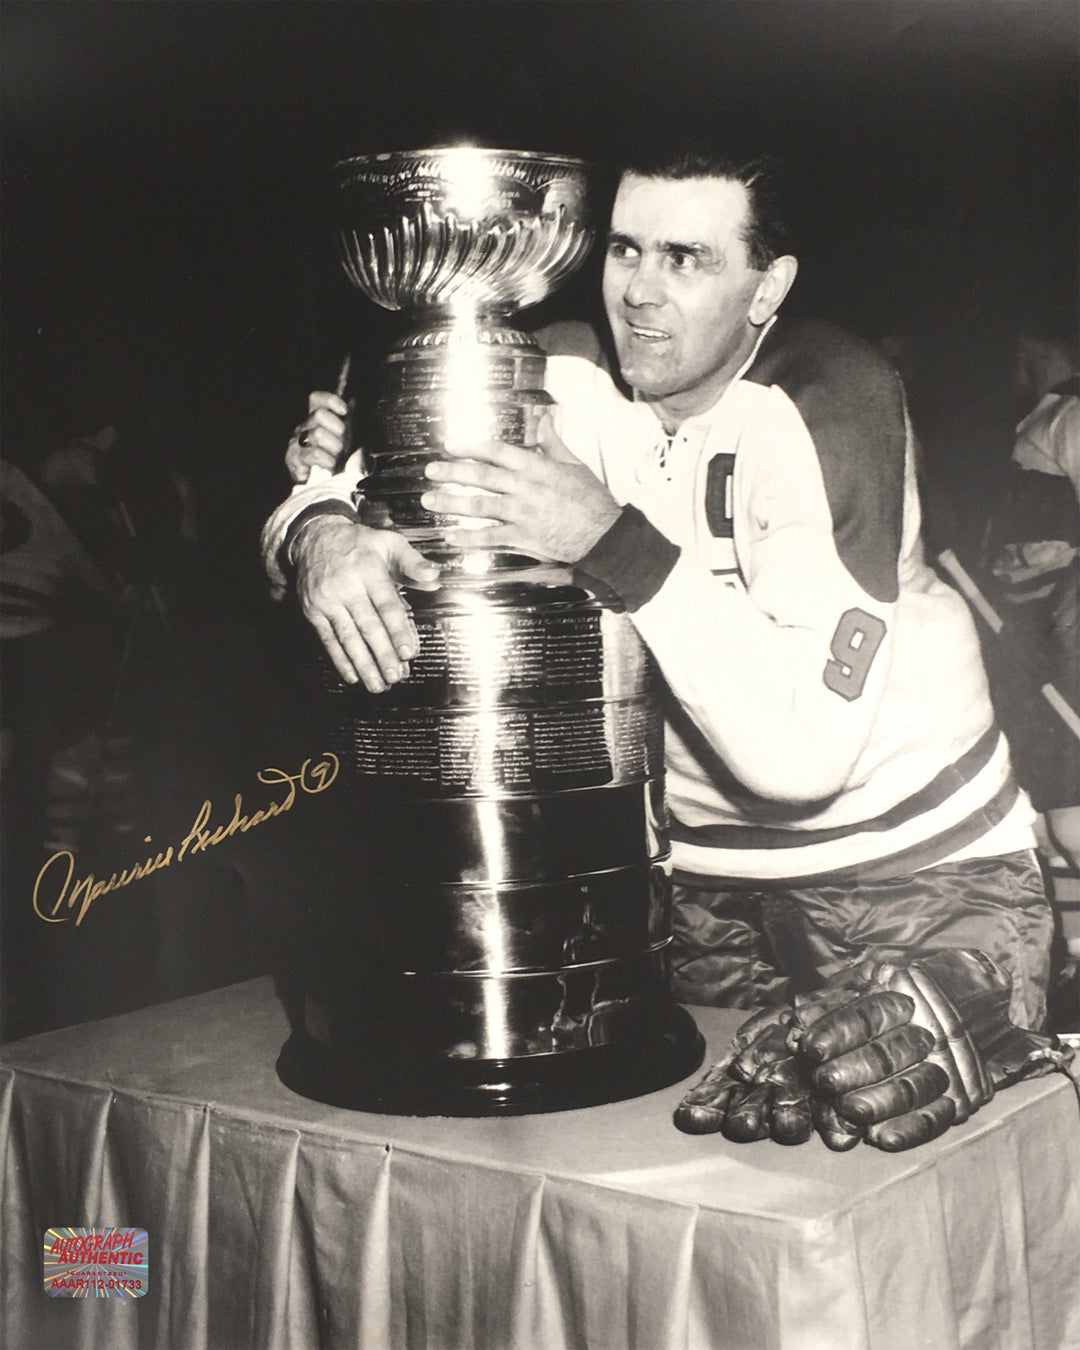 Autographed Maurice Richard Stanley Cup 8X10 Photo - Montreal Canadiens, Montreal Canadiens, NHL, Hockey, Autographed, Signed, AAHPH33203